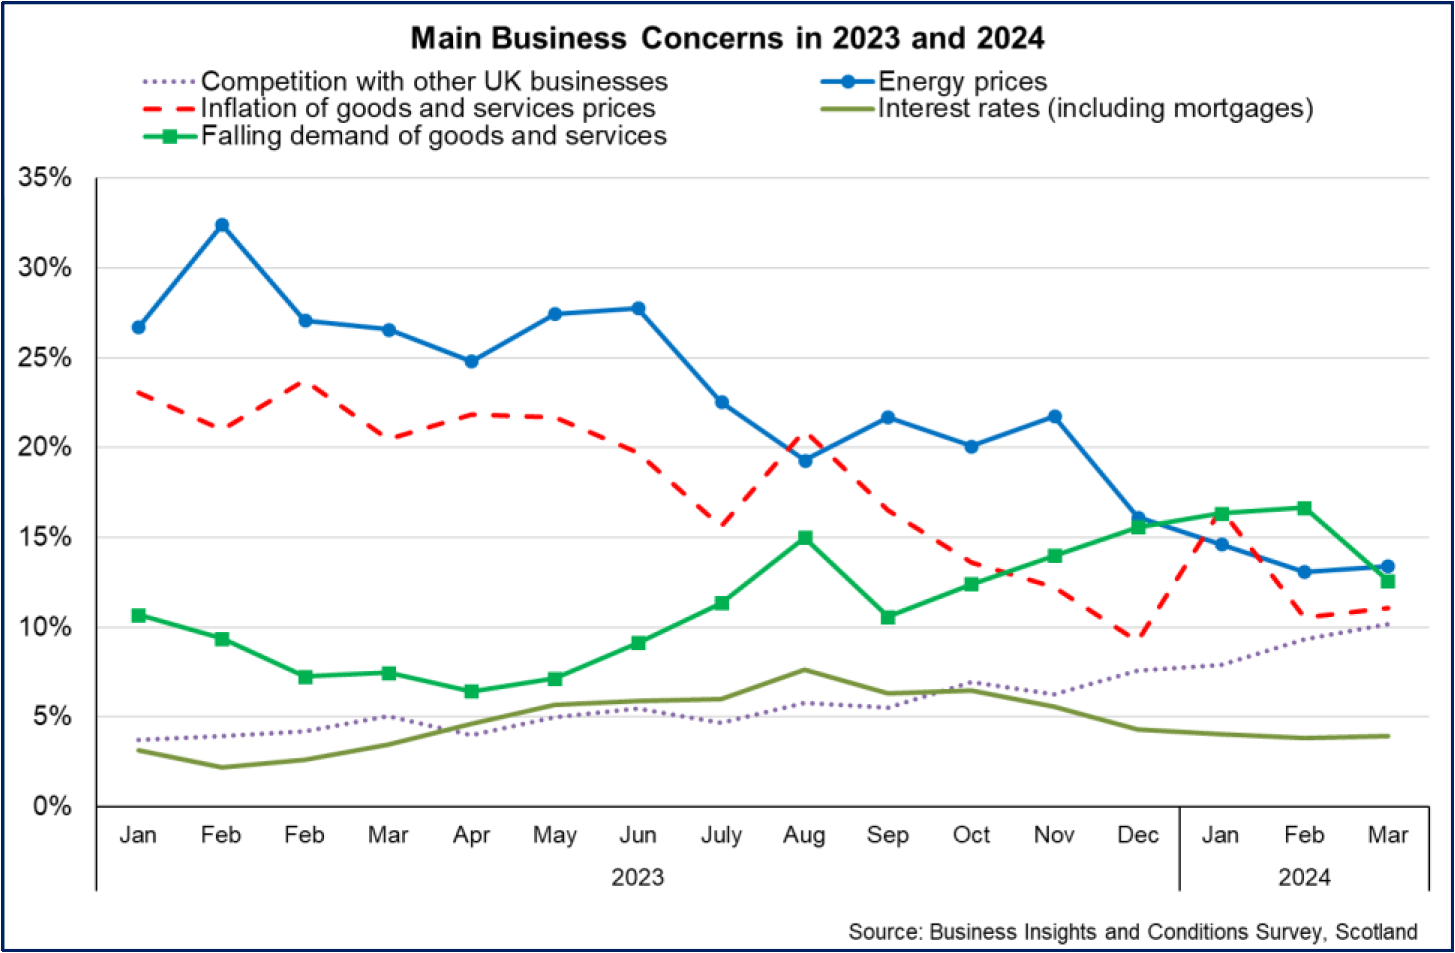 main business concerns in March 2024 are energy prices, falling demand of goods and services and inflation of goods and services